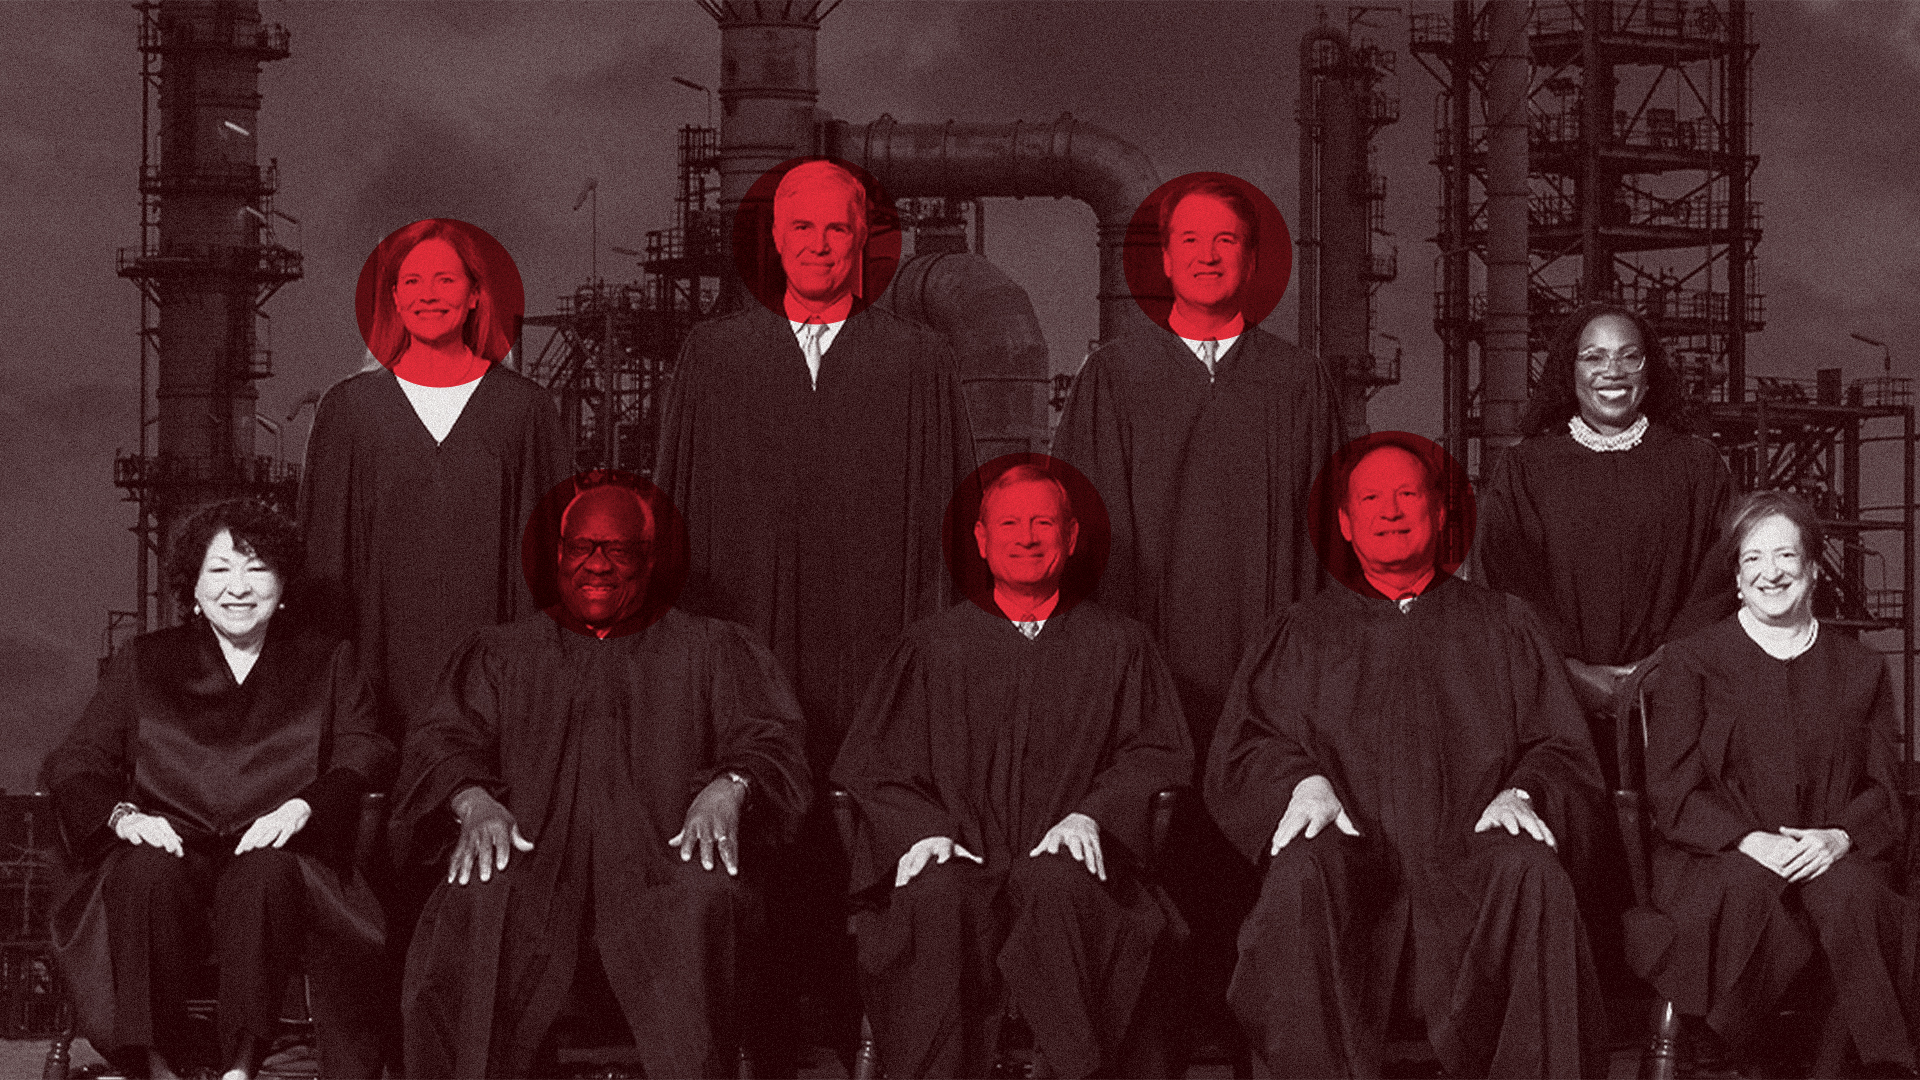 Group photo of the Supreme Court Justices. MAGA judges highlighted in red.